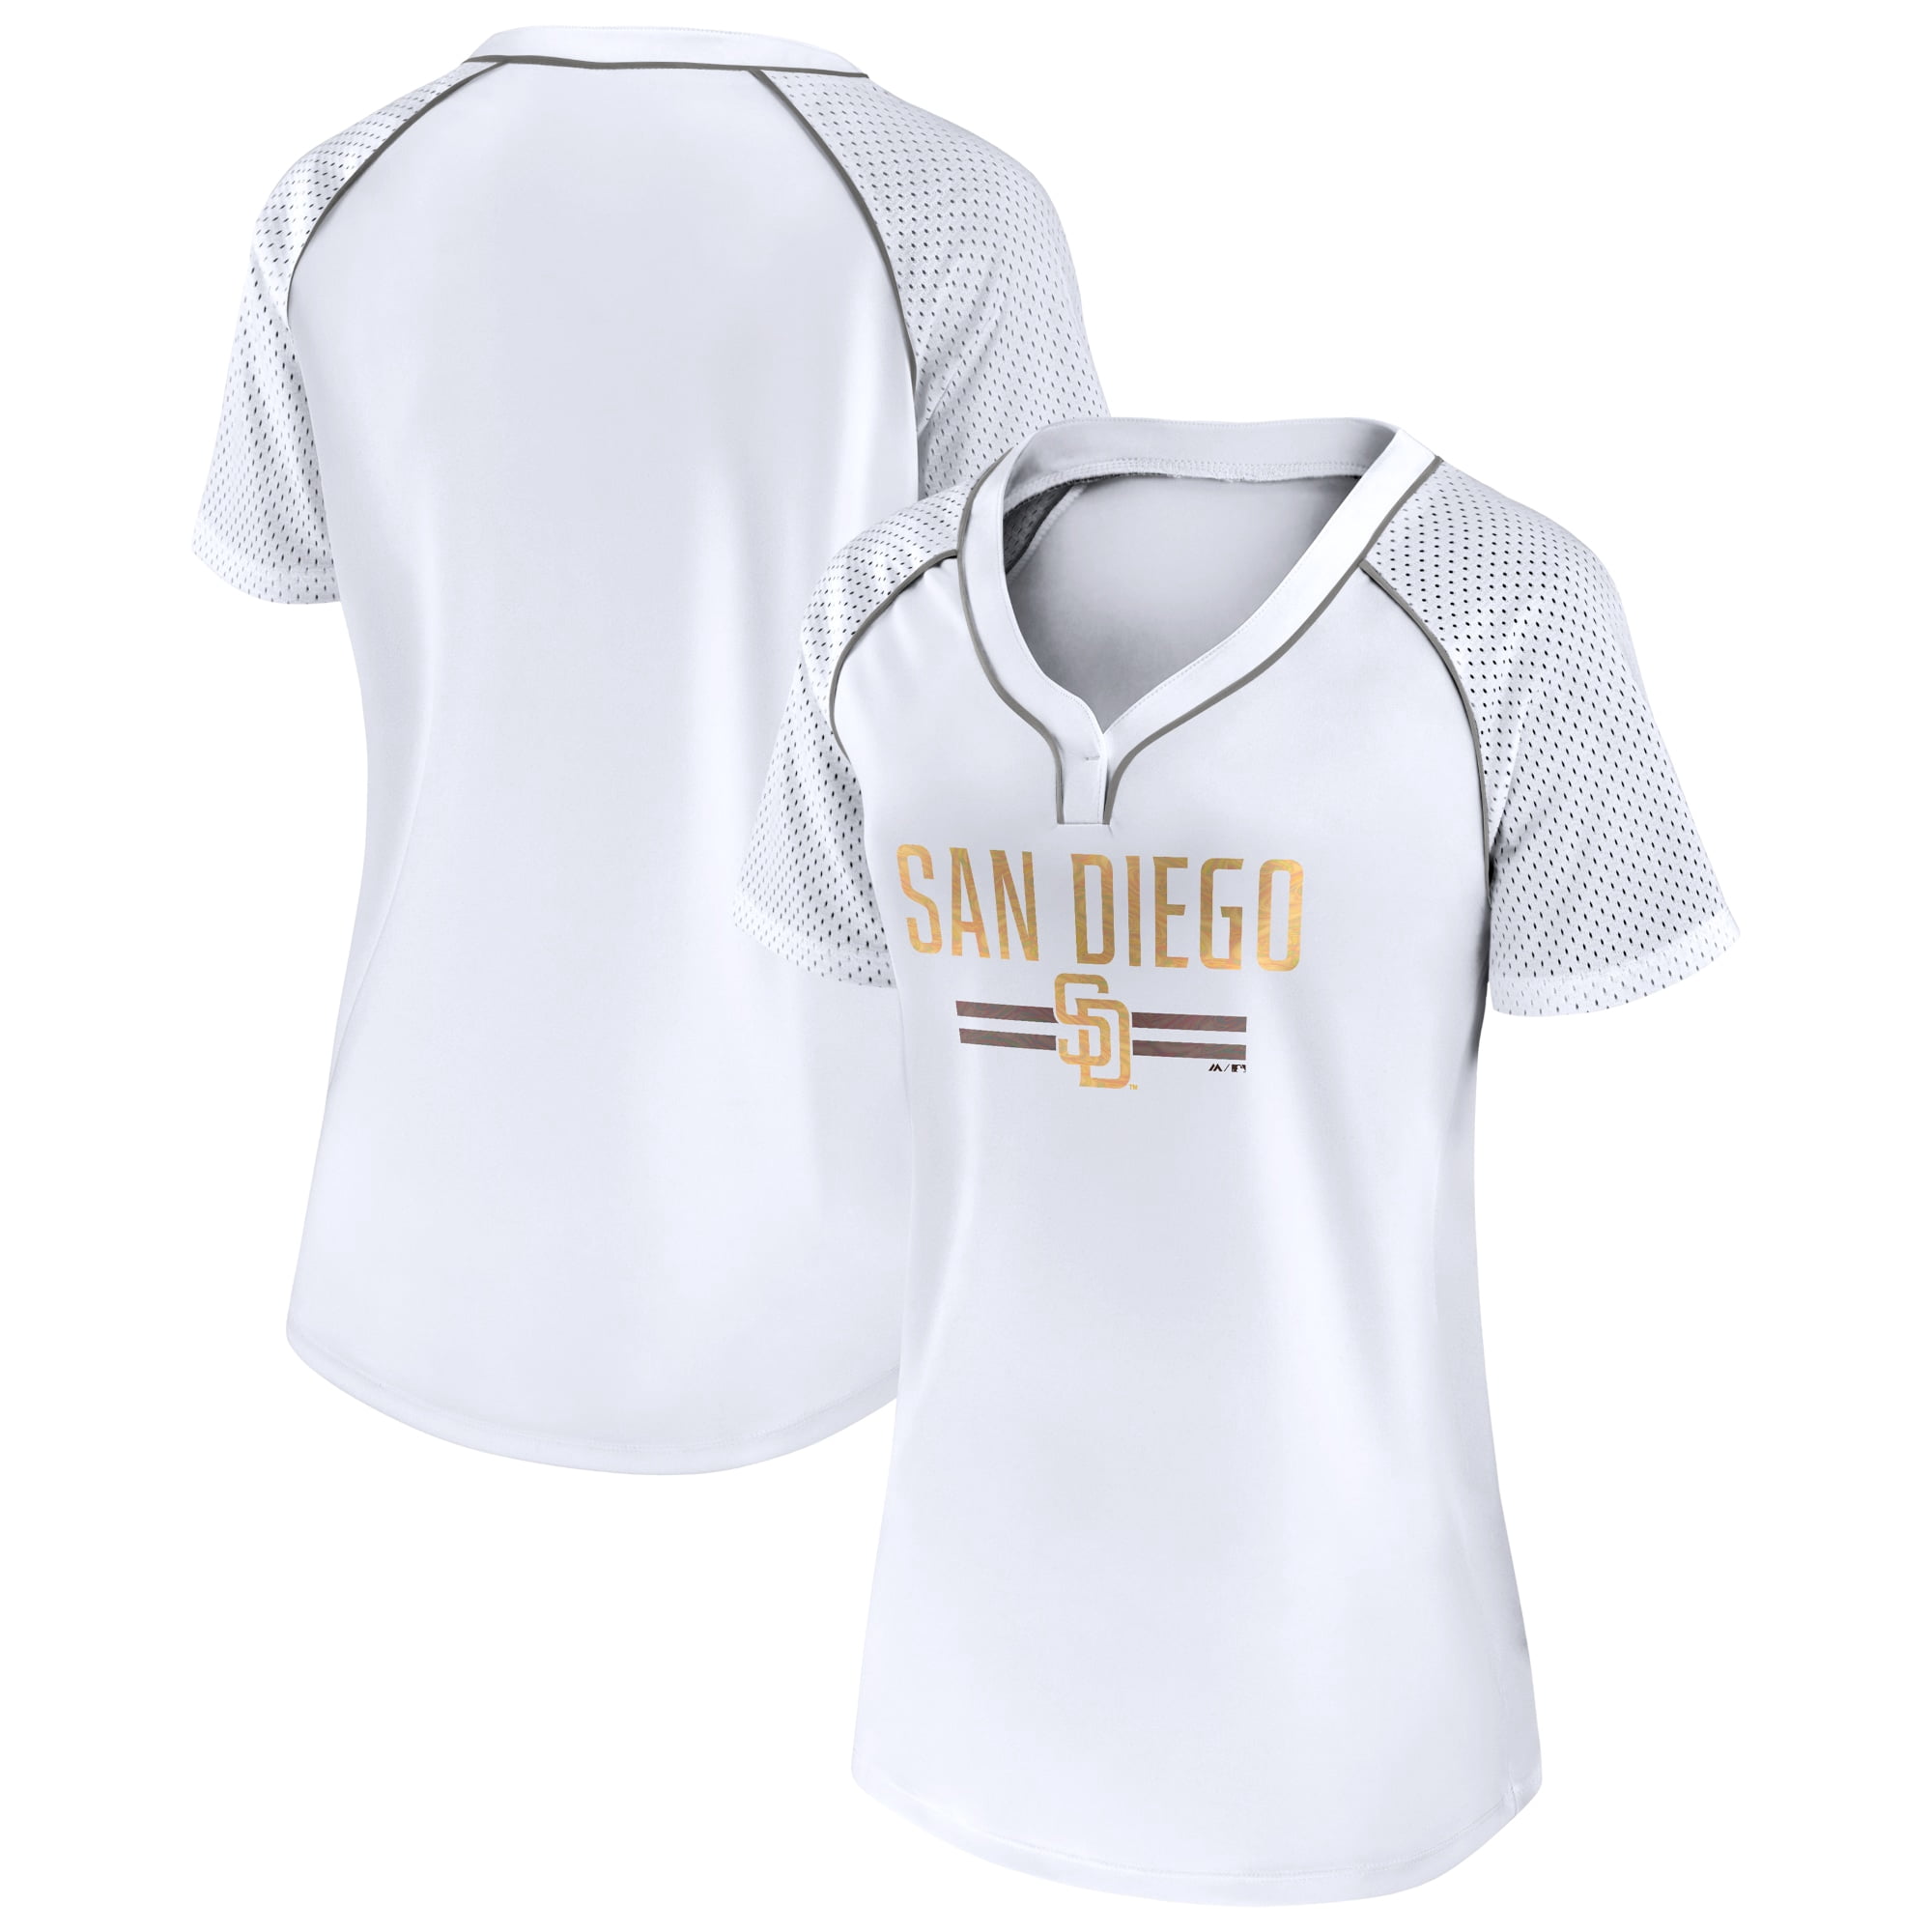 Women's Fanatics Branded White San Diego Padres Play Calling Packet V-Neck  T-Shirt 